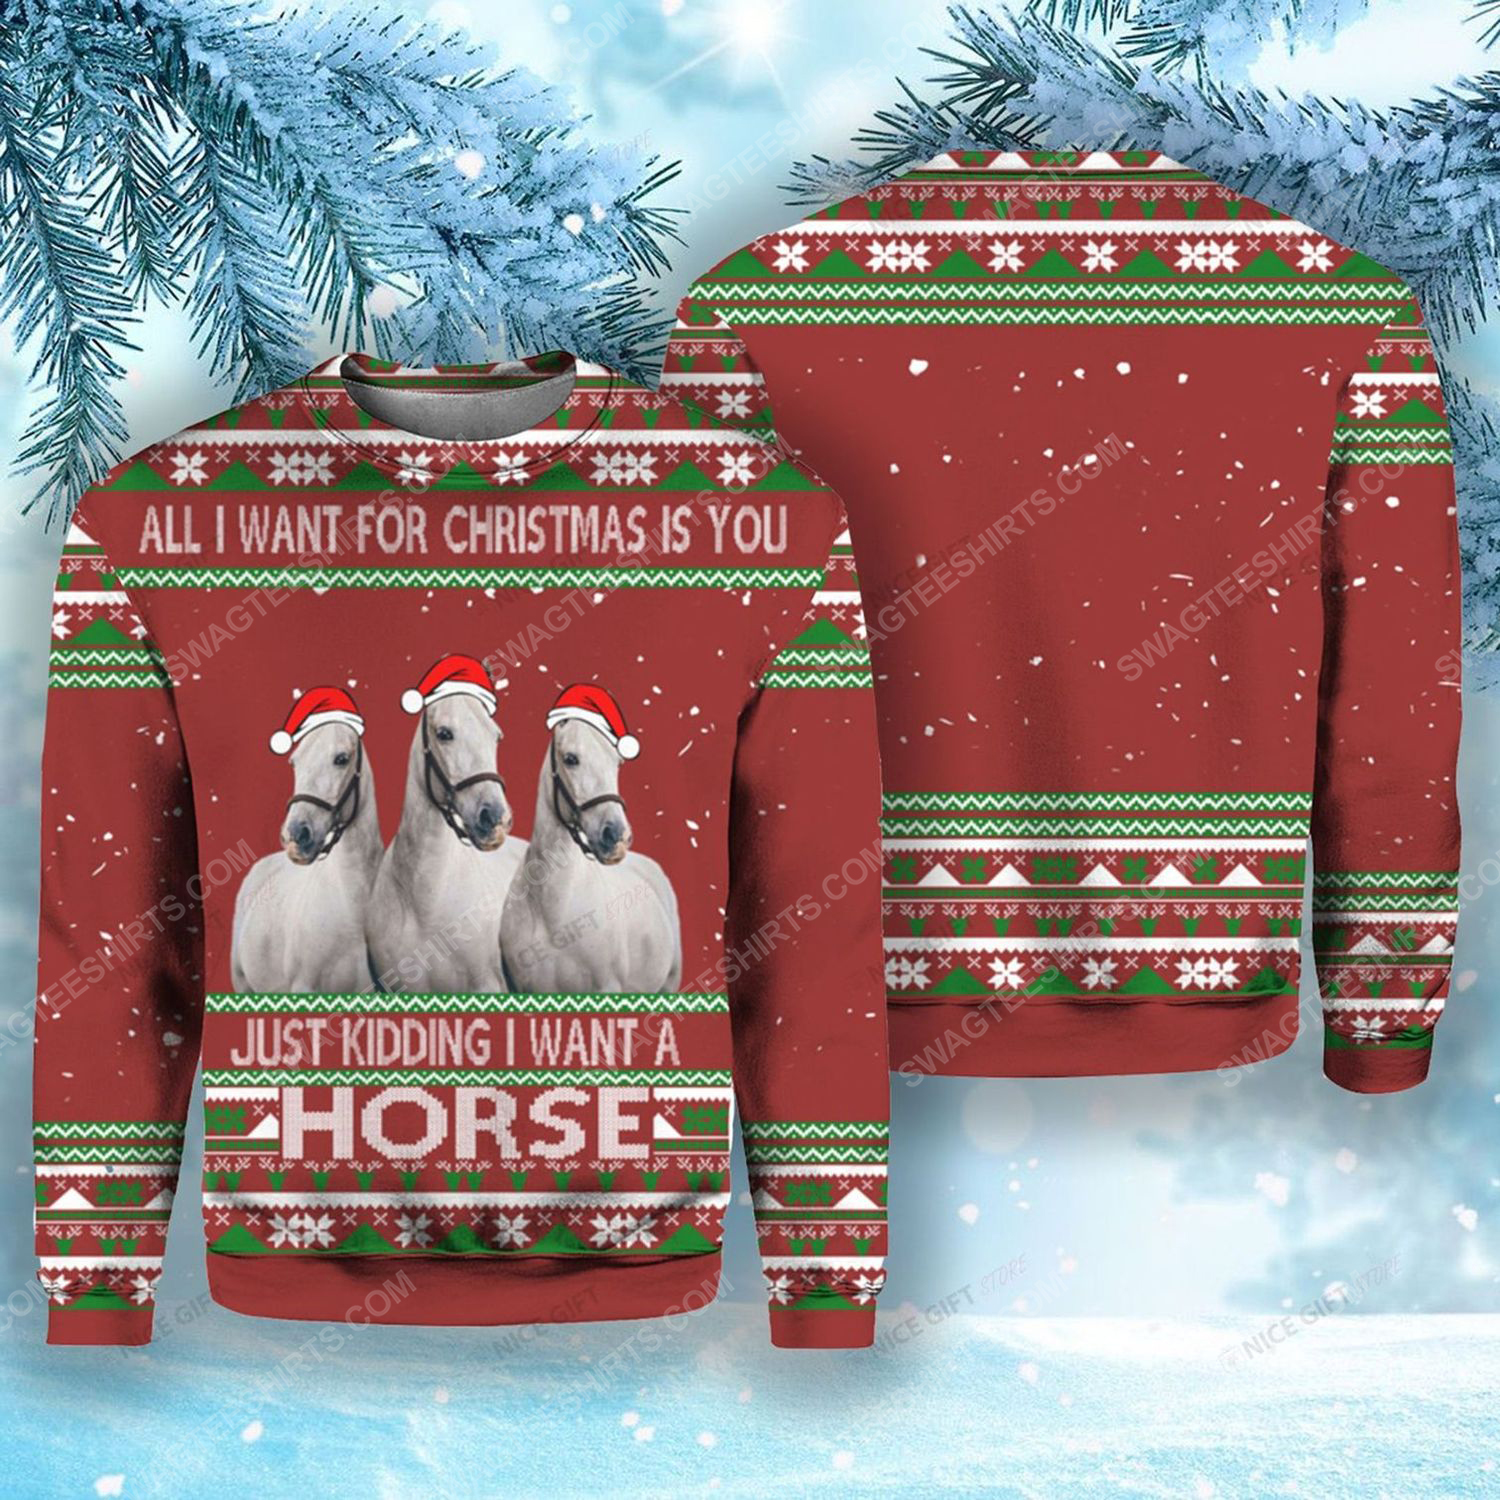 All i want for christmas is you just kidding i want a horse ugly christmas sweater 1 - Copy (2)